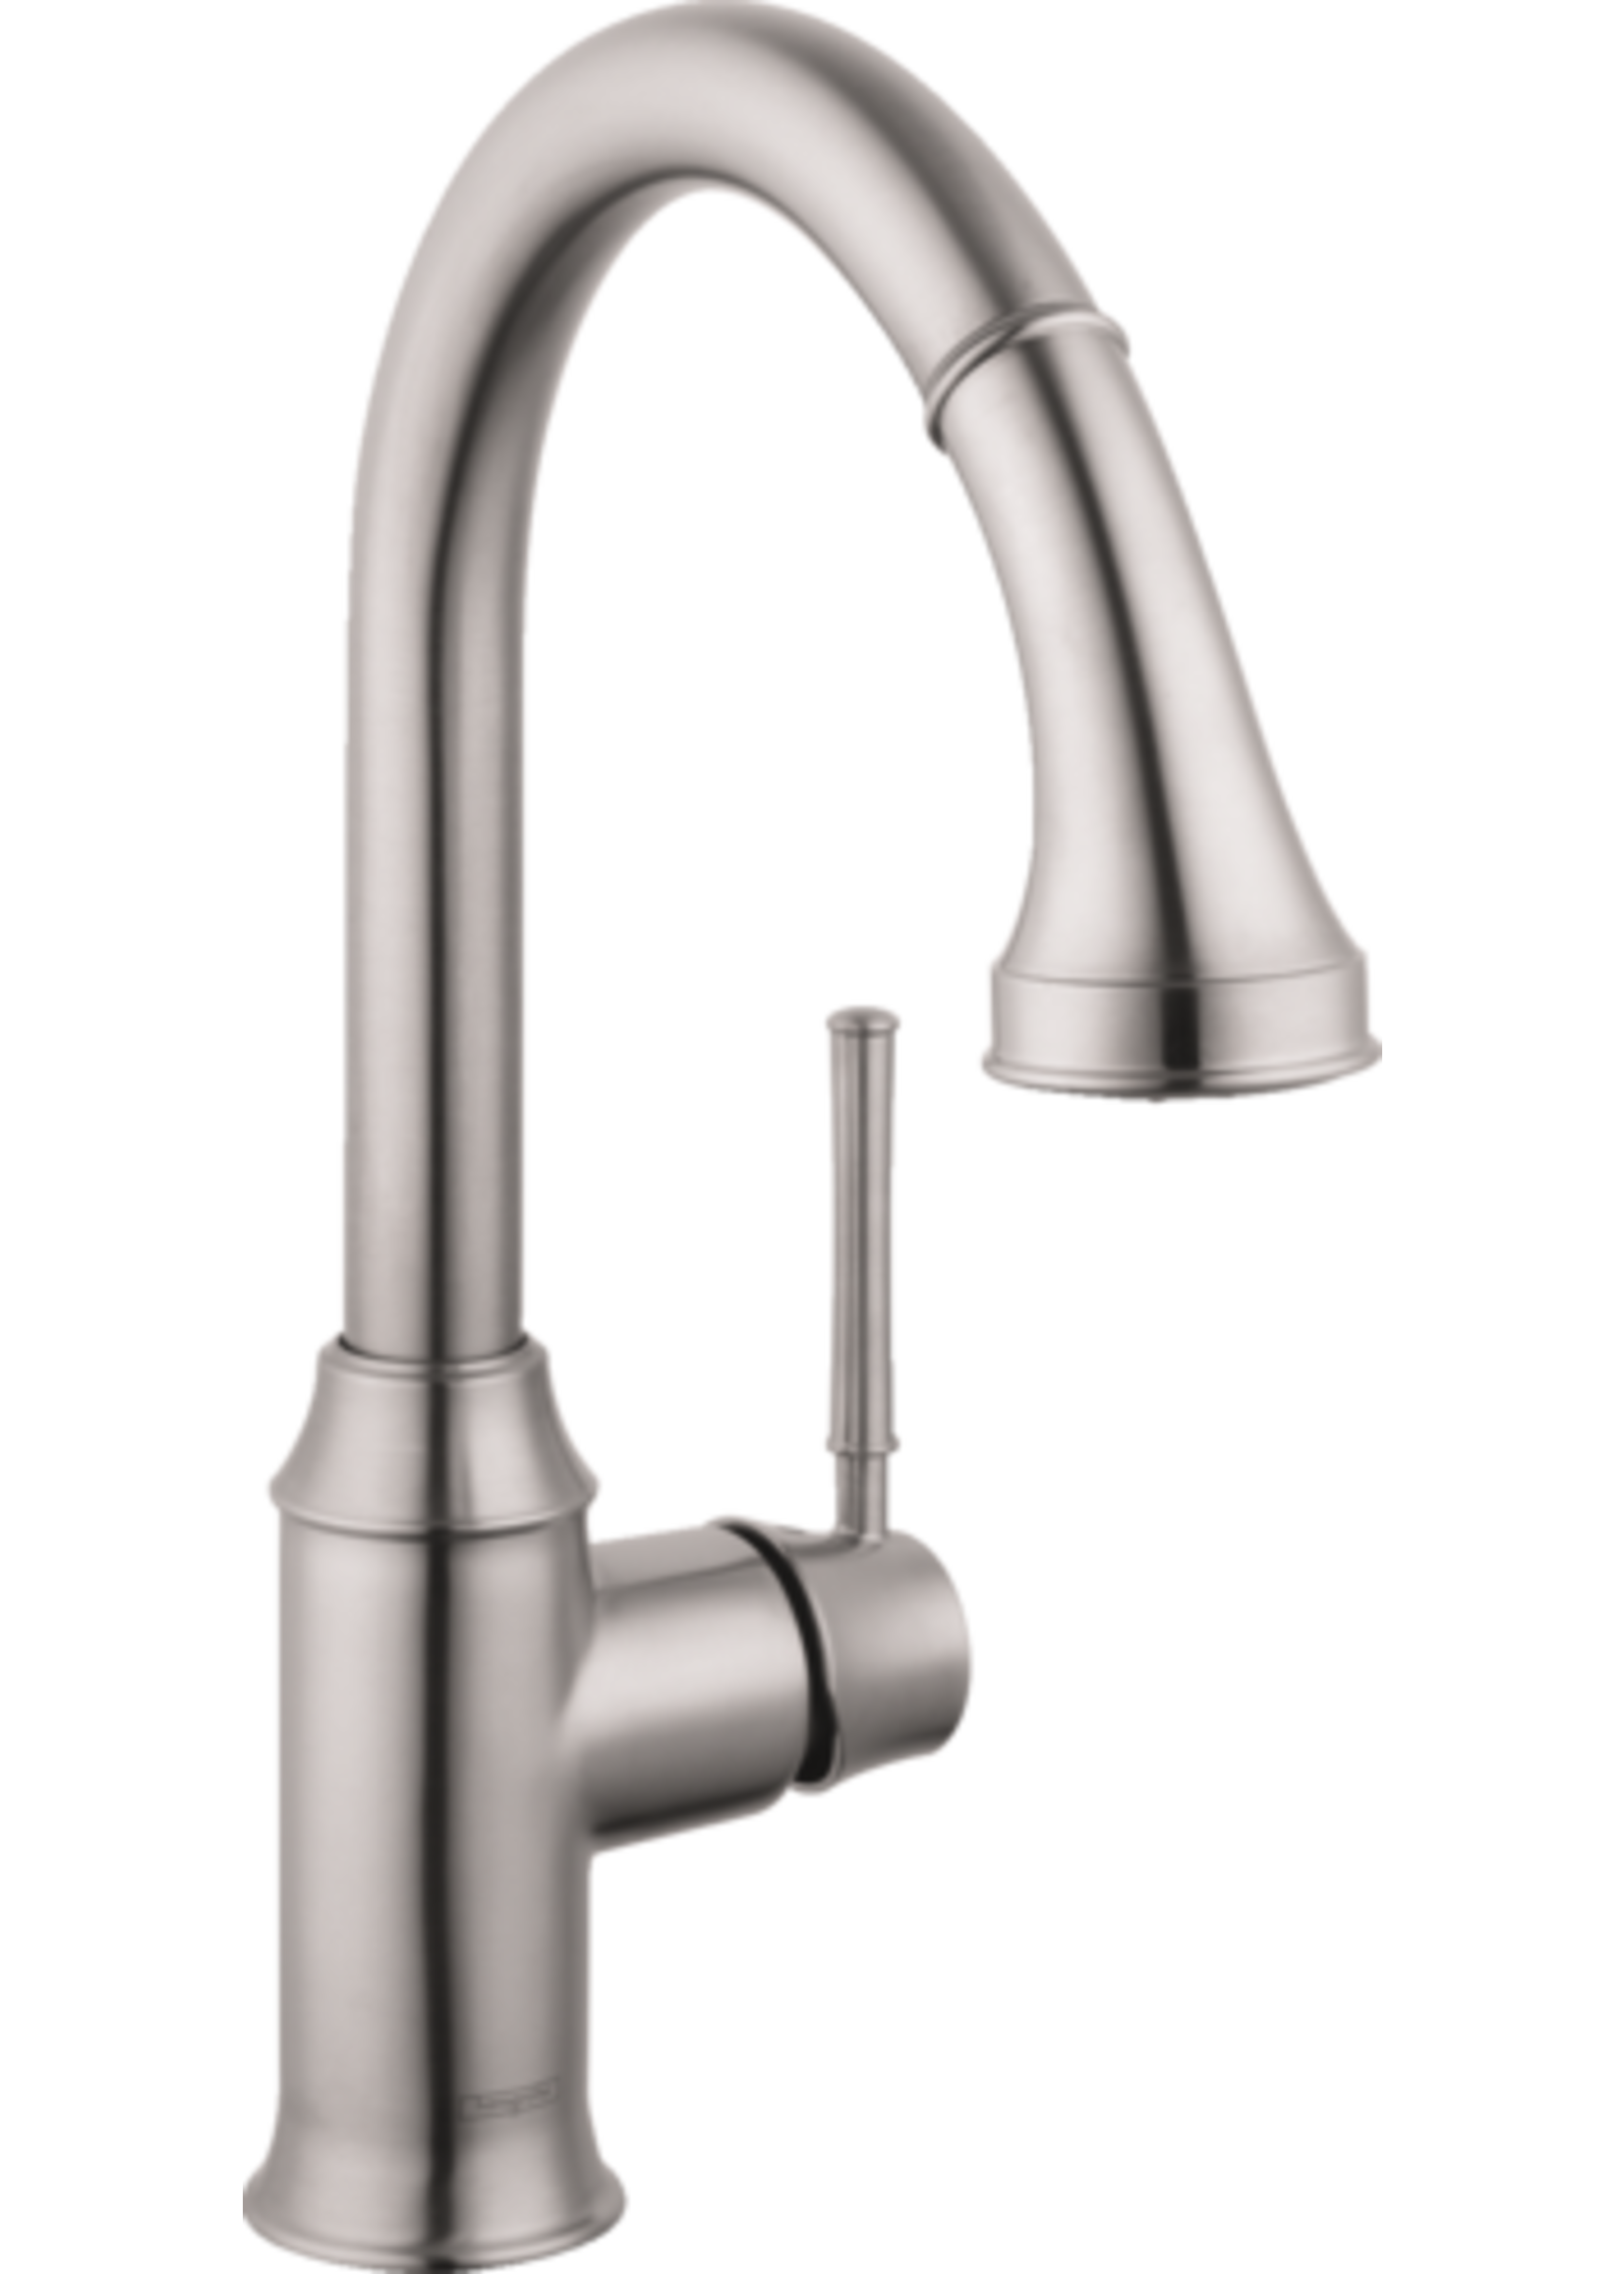 Hansgrohe Hansgrohe Talis C HighArc 2-Spray Pull Down, 1.75 GPM Kitchen Faucet